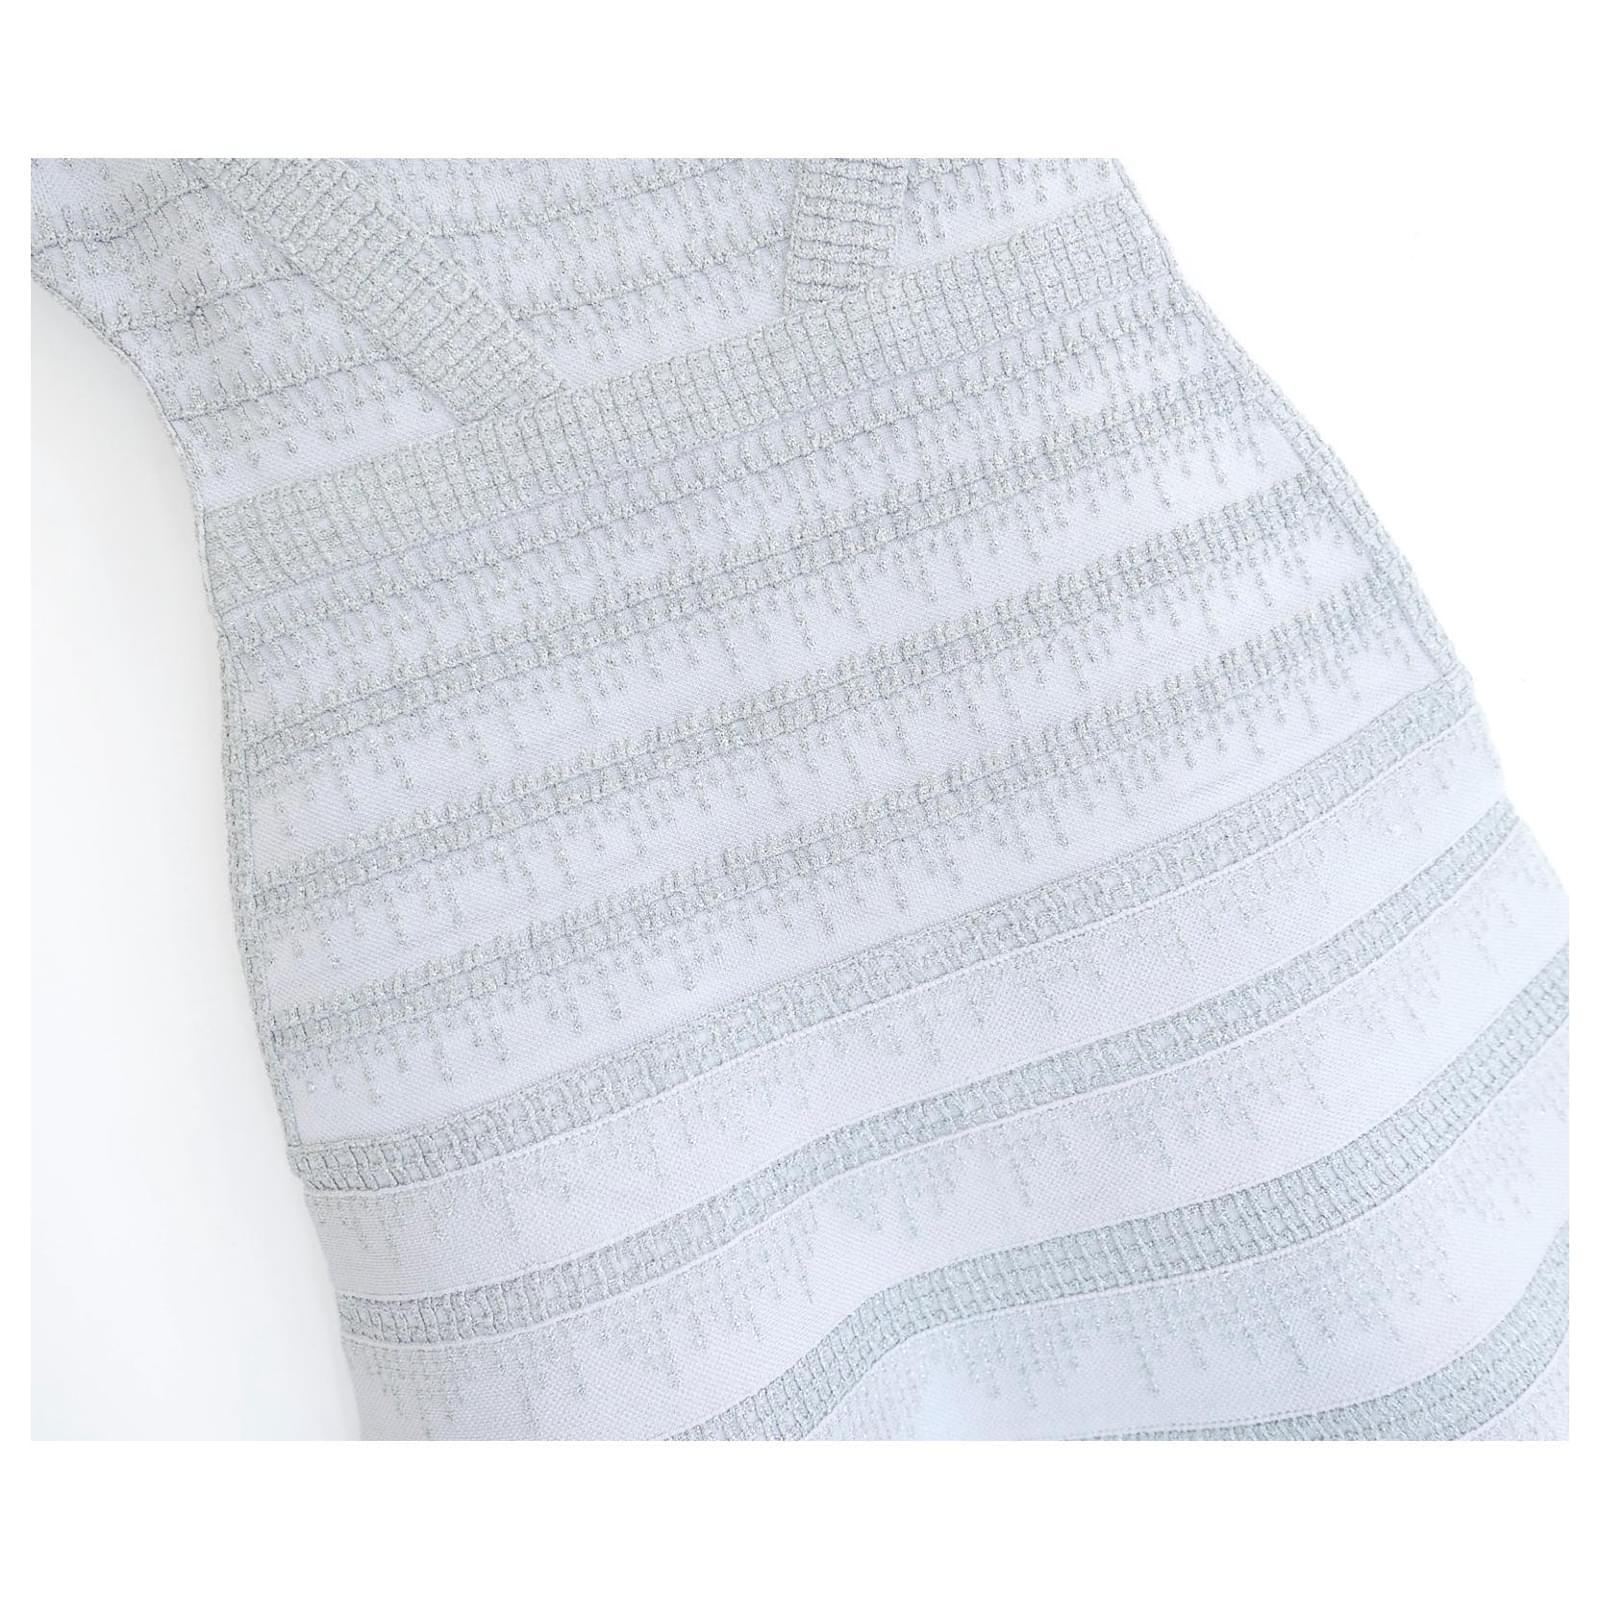 gorgeous, ice queen Herve Leger Carole dress - bought for £1125 and new with tags. Made from Leger's signature super stretchy, thick 'cinch you in' rayon mix in a gorgeous icy Pearl Blue shade with beautiful sparkling knit detailing. It has super